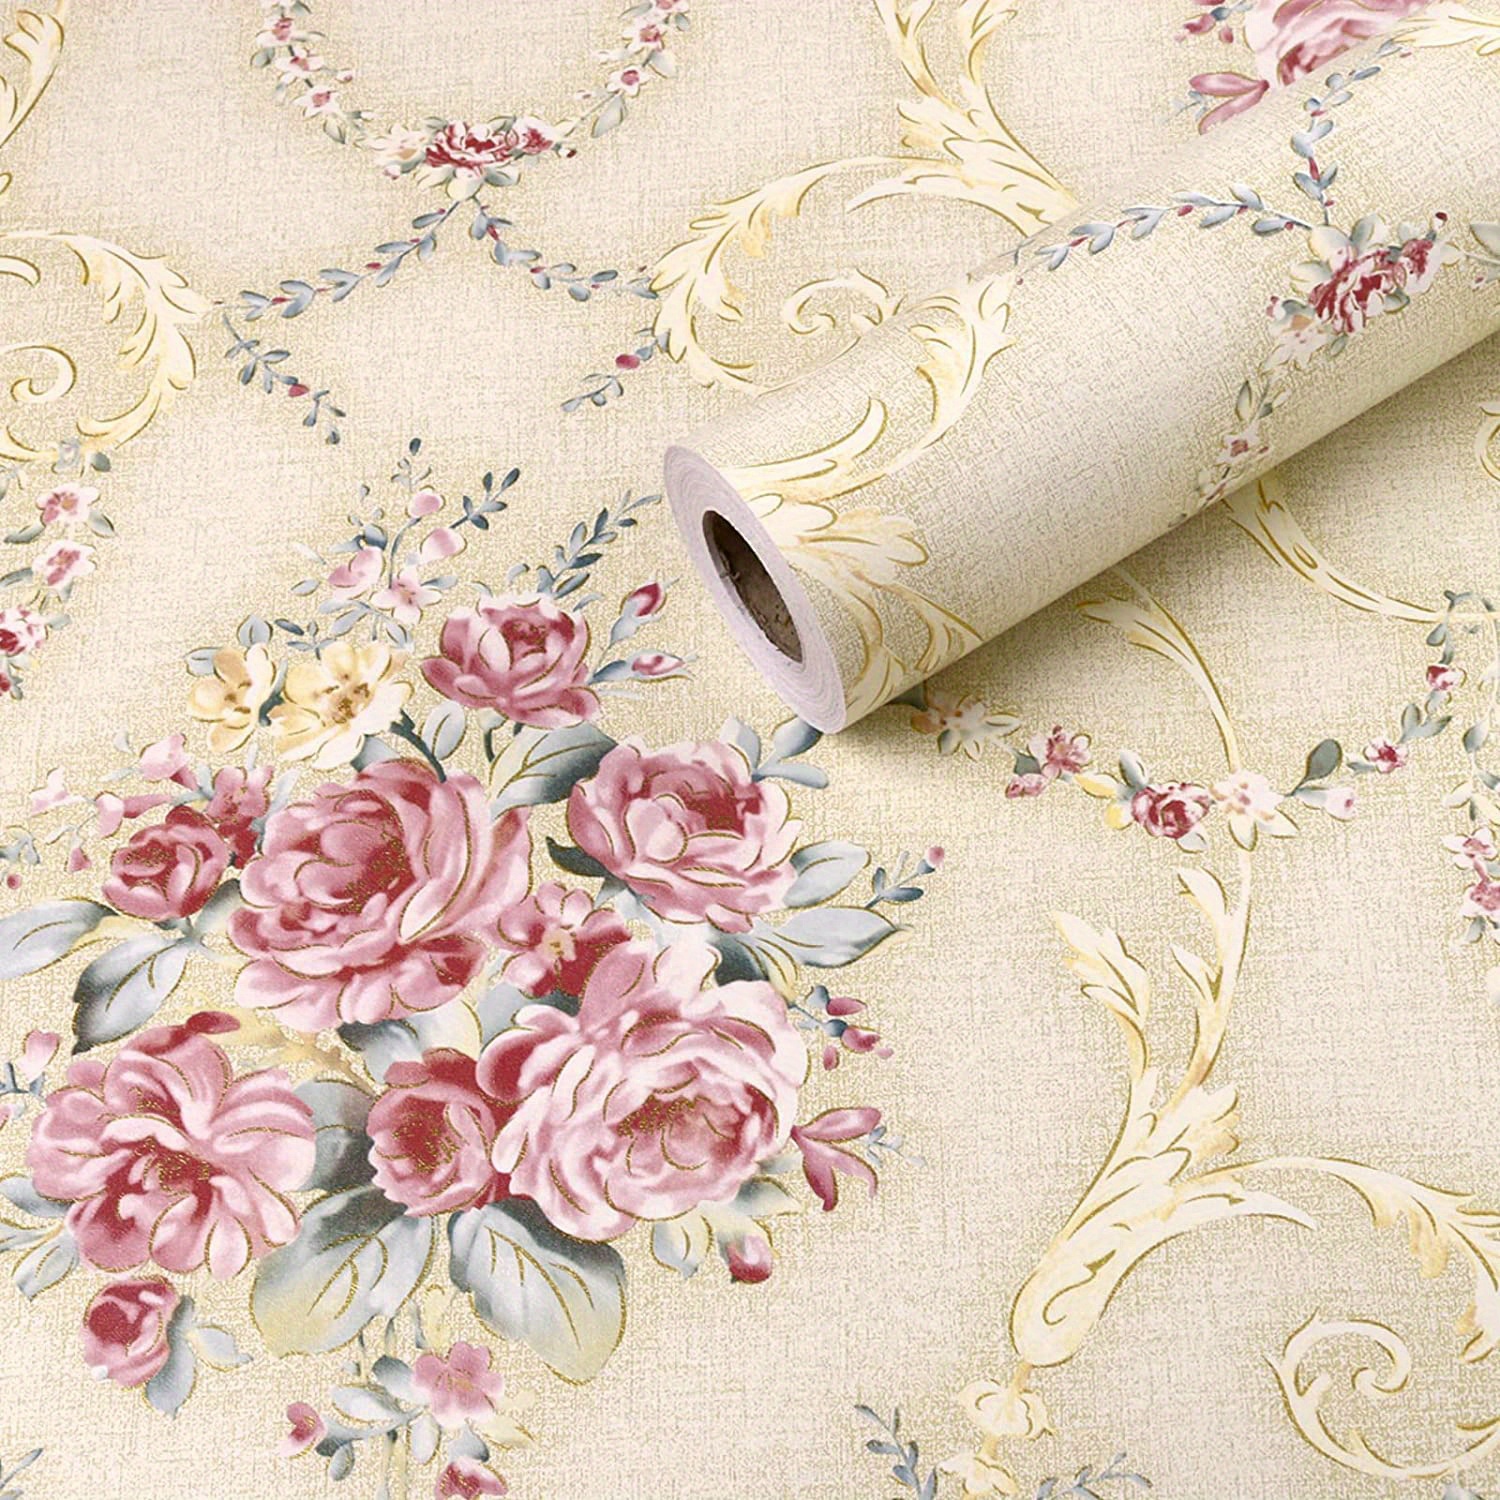 Self Adhesive Vinyl Decorative Floral Contact Paper Drawer Shelf Liner Removable Peel and Stick Wallpaper for Kitchen Cabinets Dresser Arts and Crafts